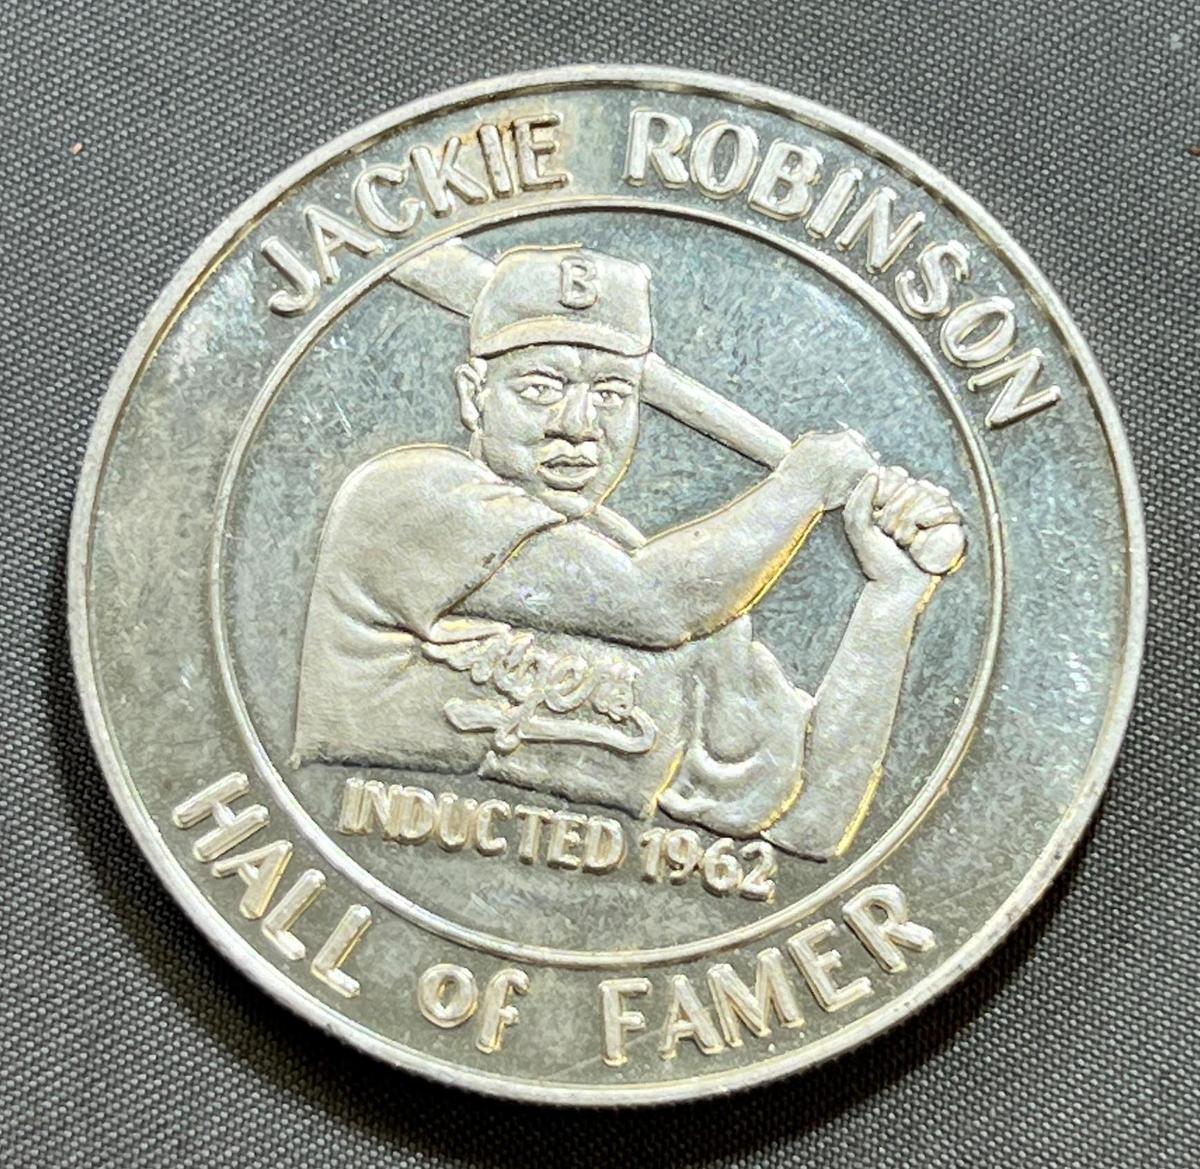 Jackie Robinson One Troy Ounce .999 Silver Round, SIGMA TESTED